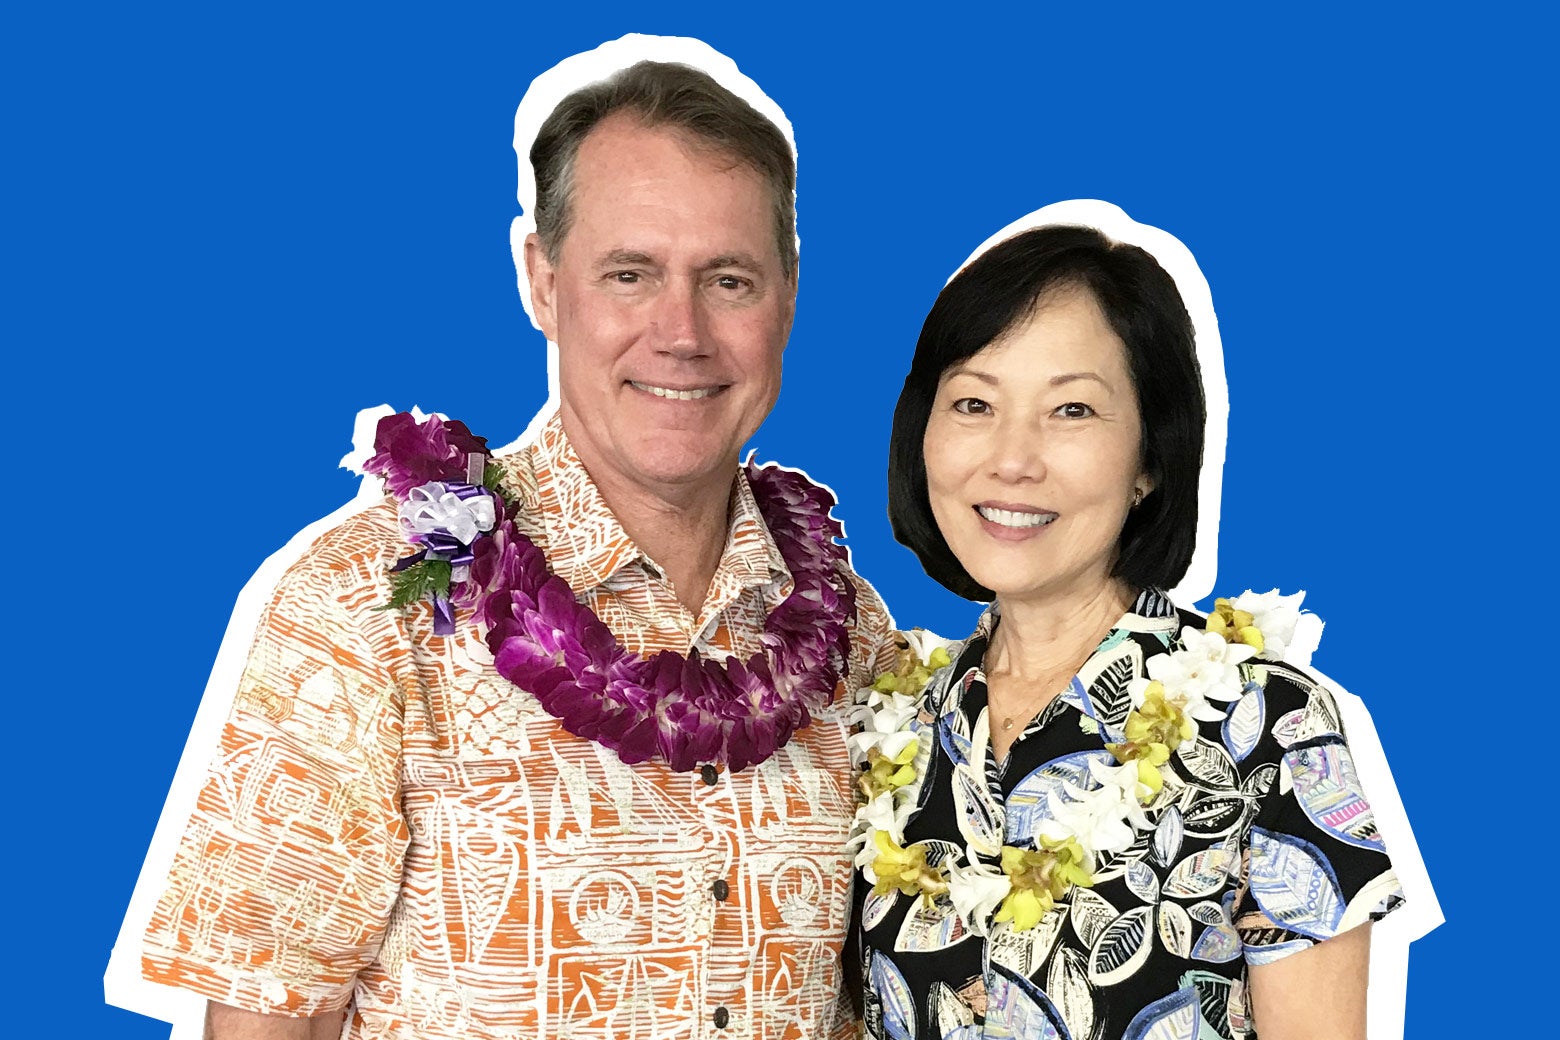 Ed Case and his wife, both wearing Hawaiian shirts and leis.